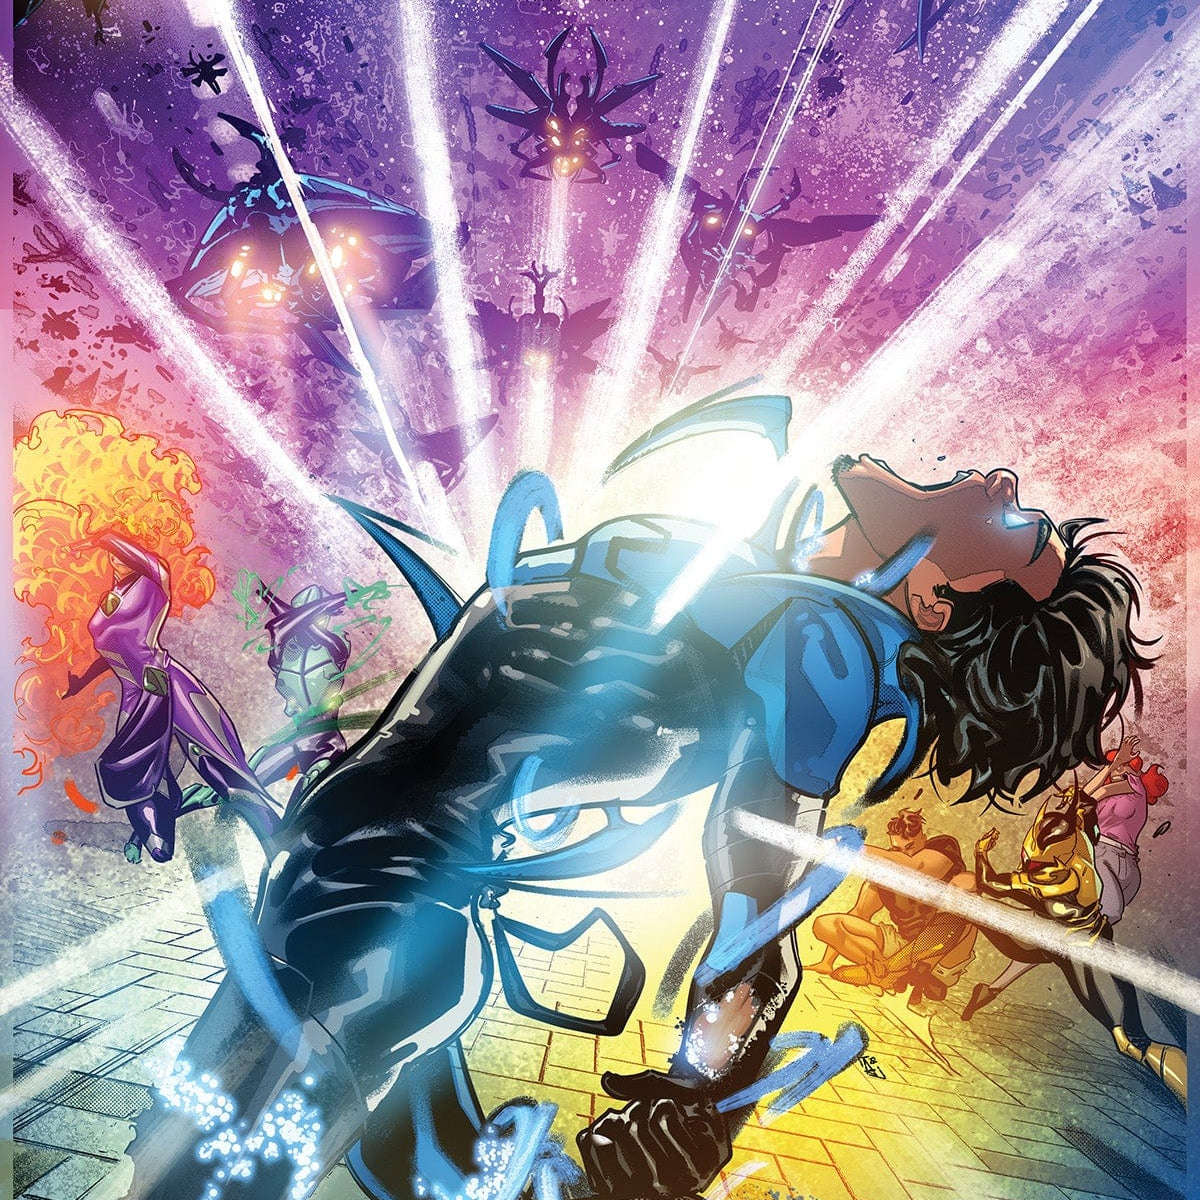 Blue Beetle #2 Preview - The Comic Book Dispatch